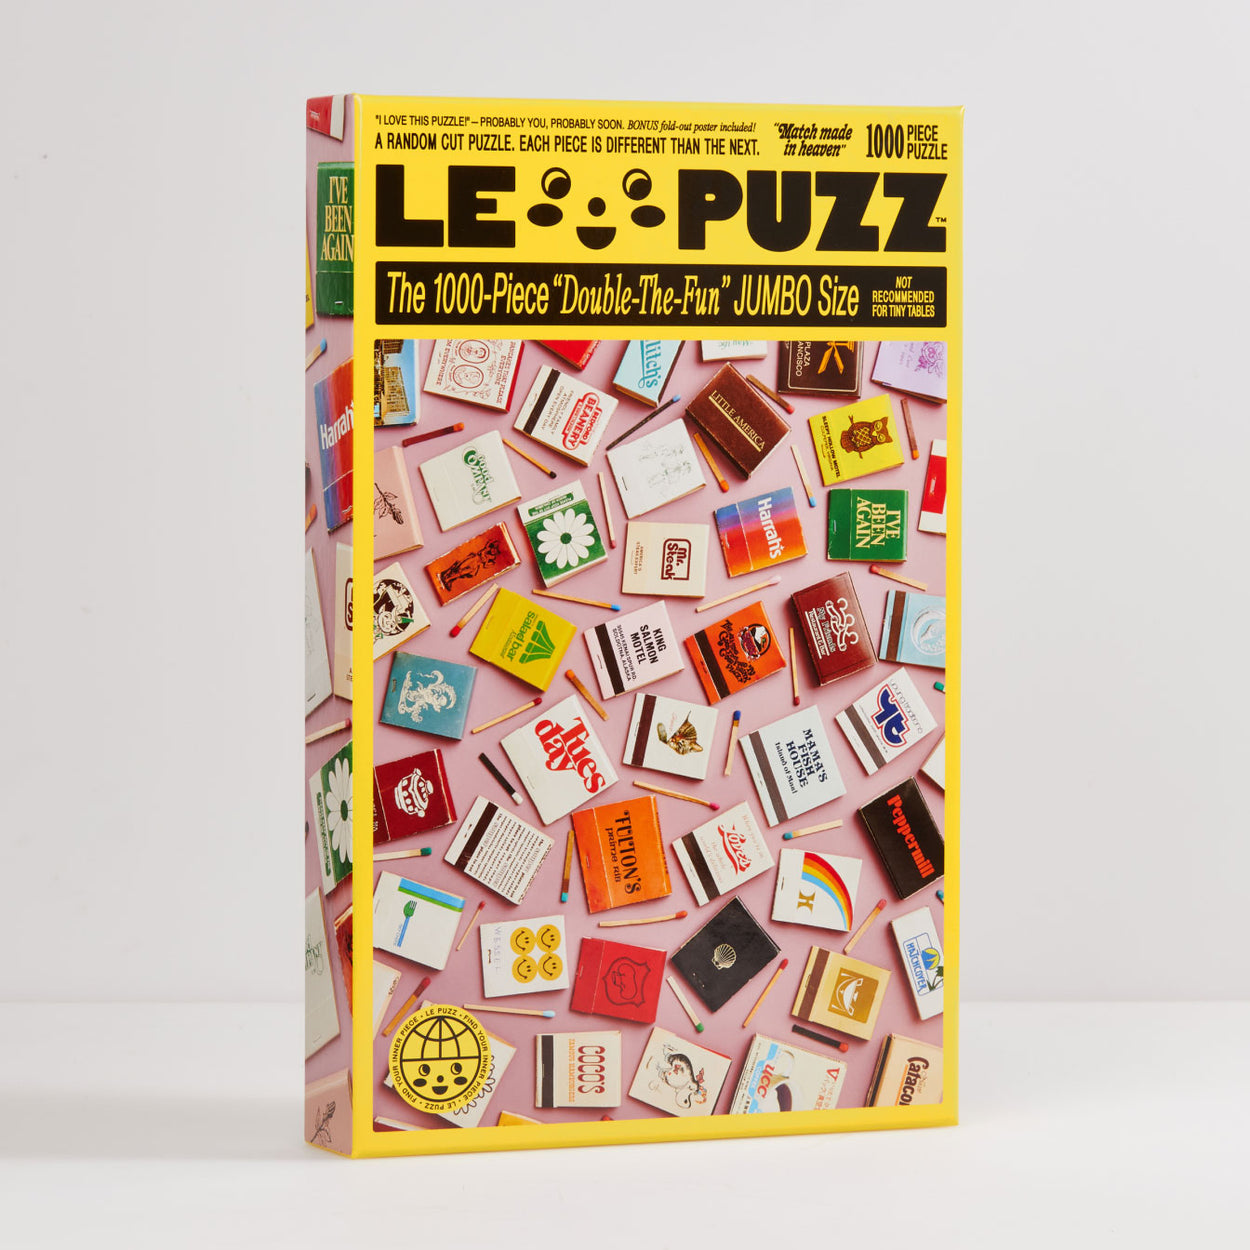 Match Made In Heaven Puzzle | Le Puzz | 1000 Pieces: various bright color retro kitsch match books and matches puzzle. Match Made in Heaven is an arrangement of our huge collection of vintage matchbooks. We fell in love the colorful tips and the diverse range of graphic designs on the covers. Hope they strike a chord with you!